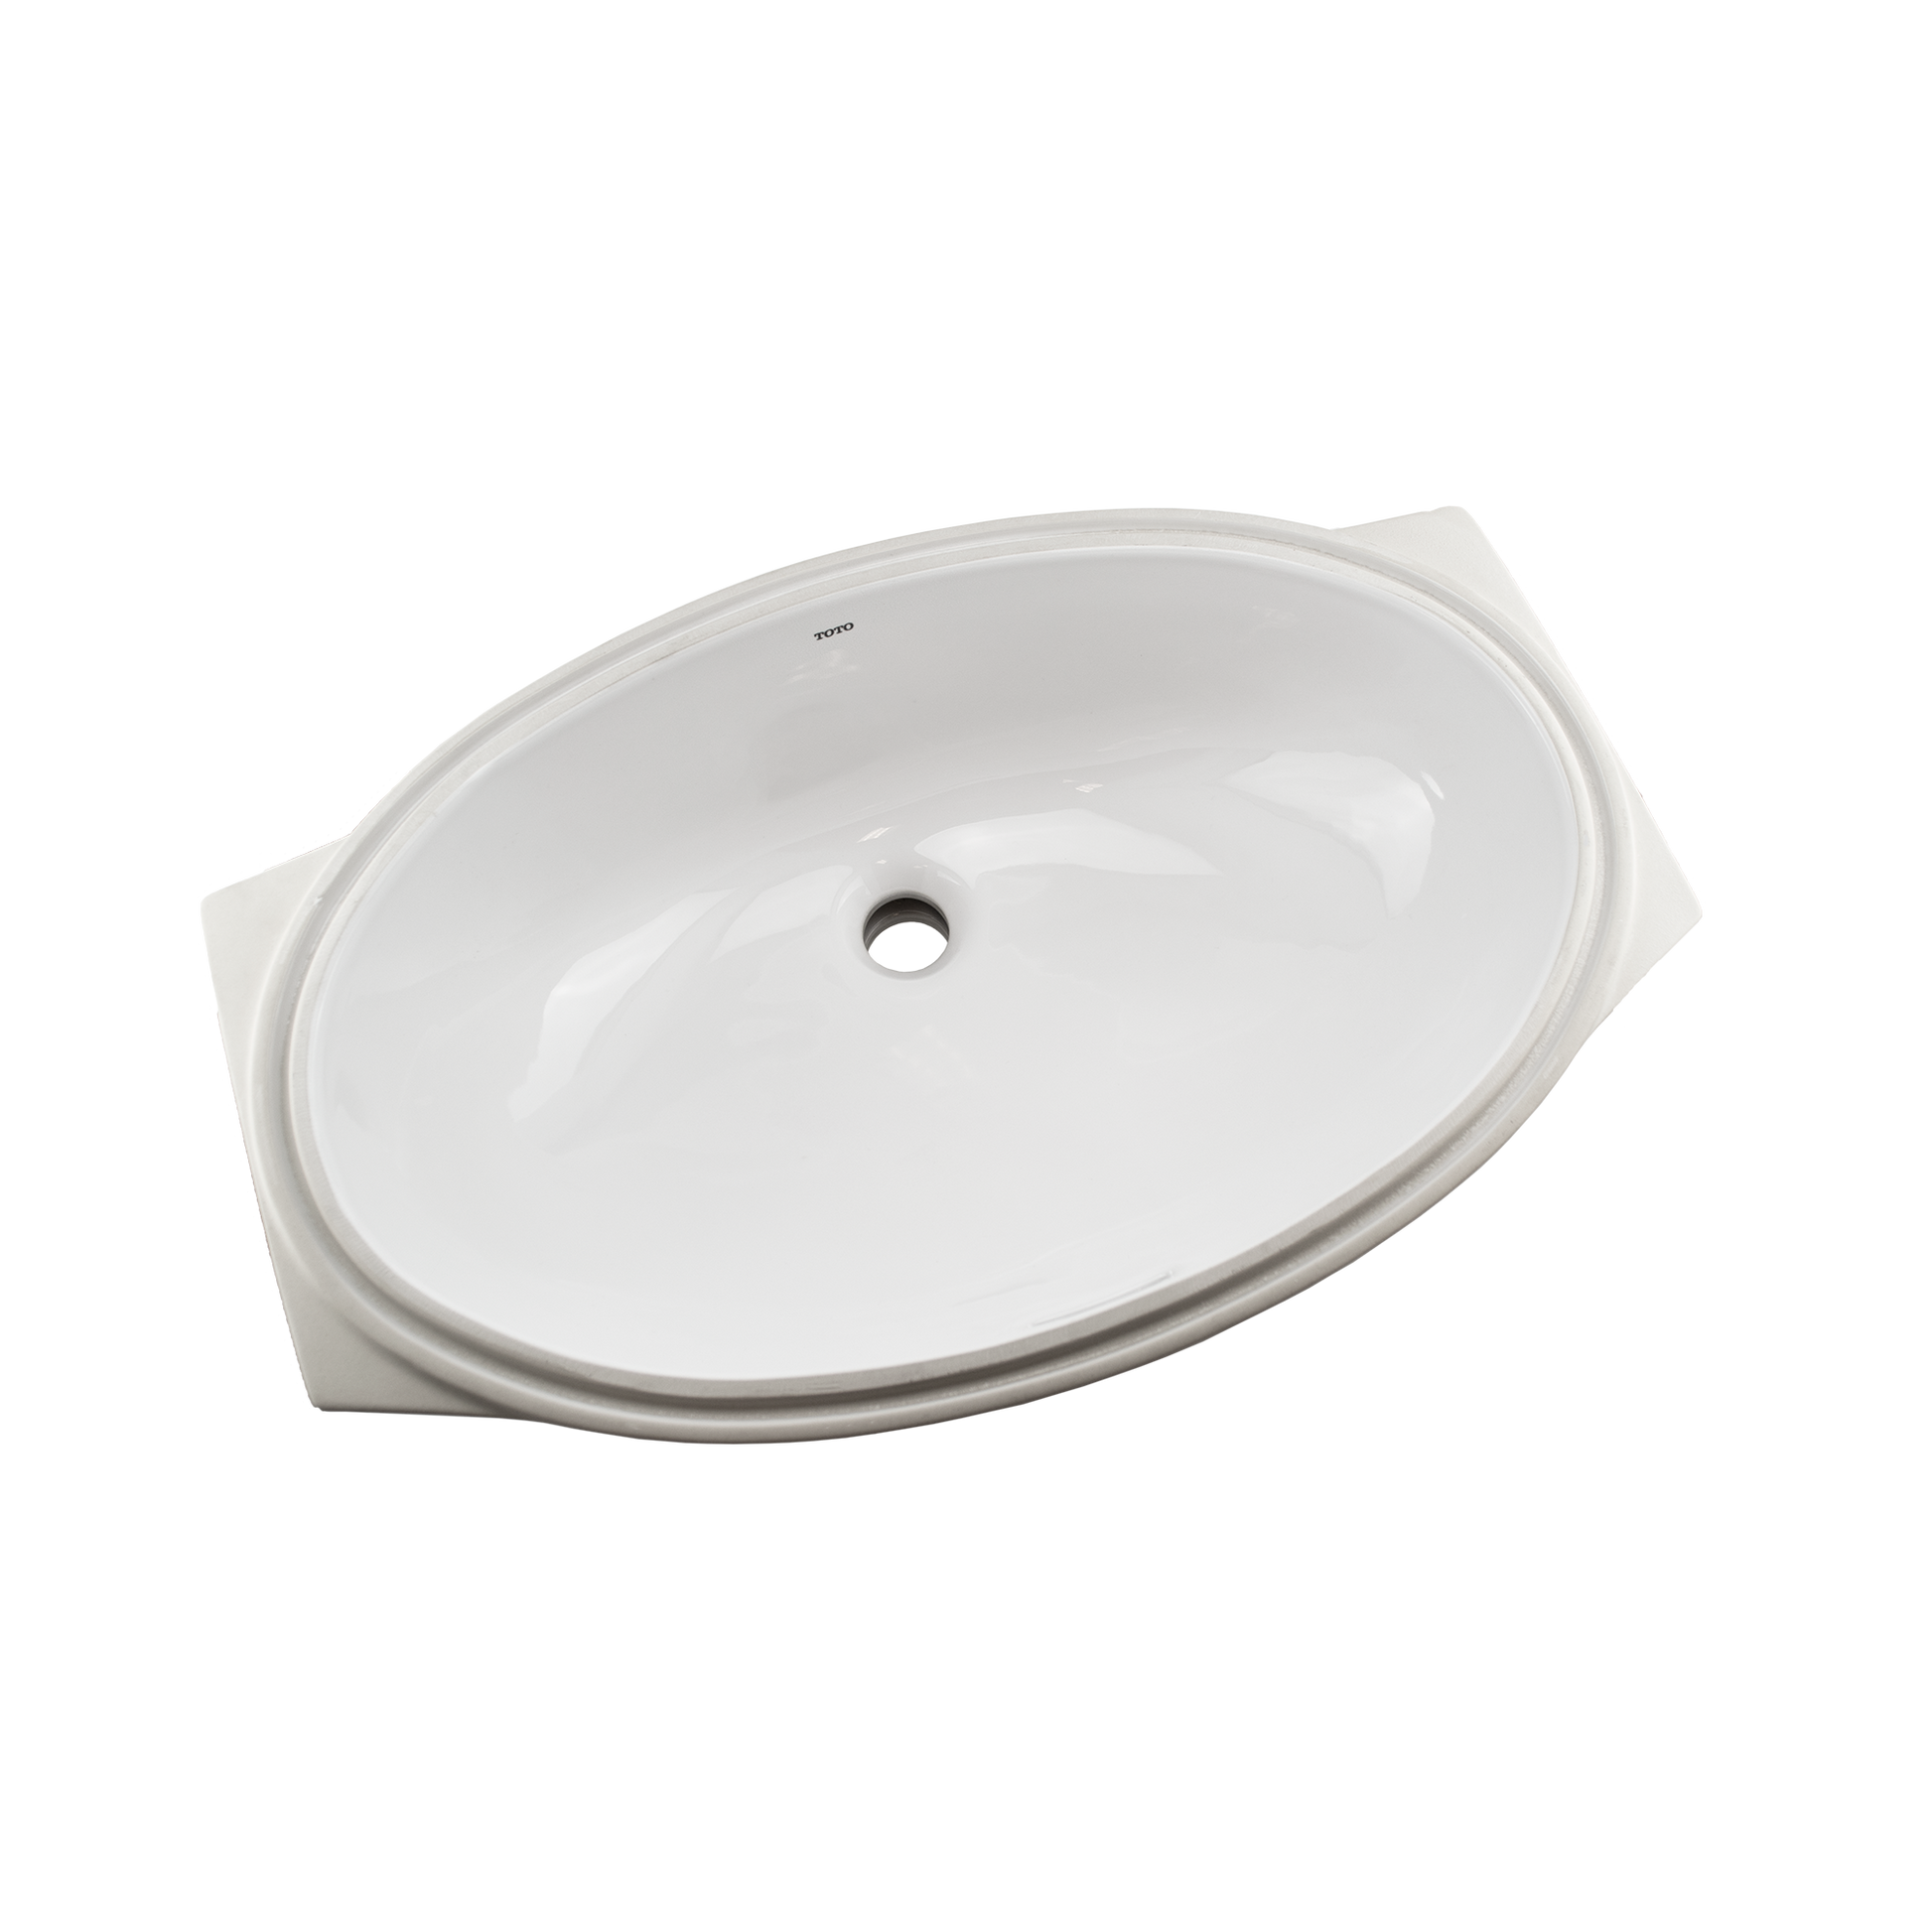 TOTO LT1506G#01 24" Oval Undermount Bathroom Sink with CEFIONTECT , Cotton White